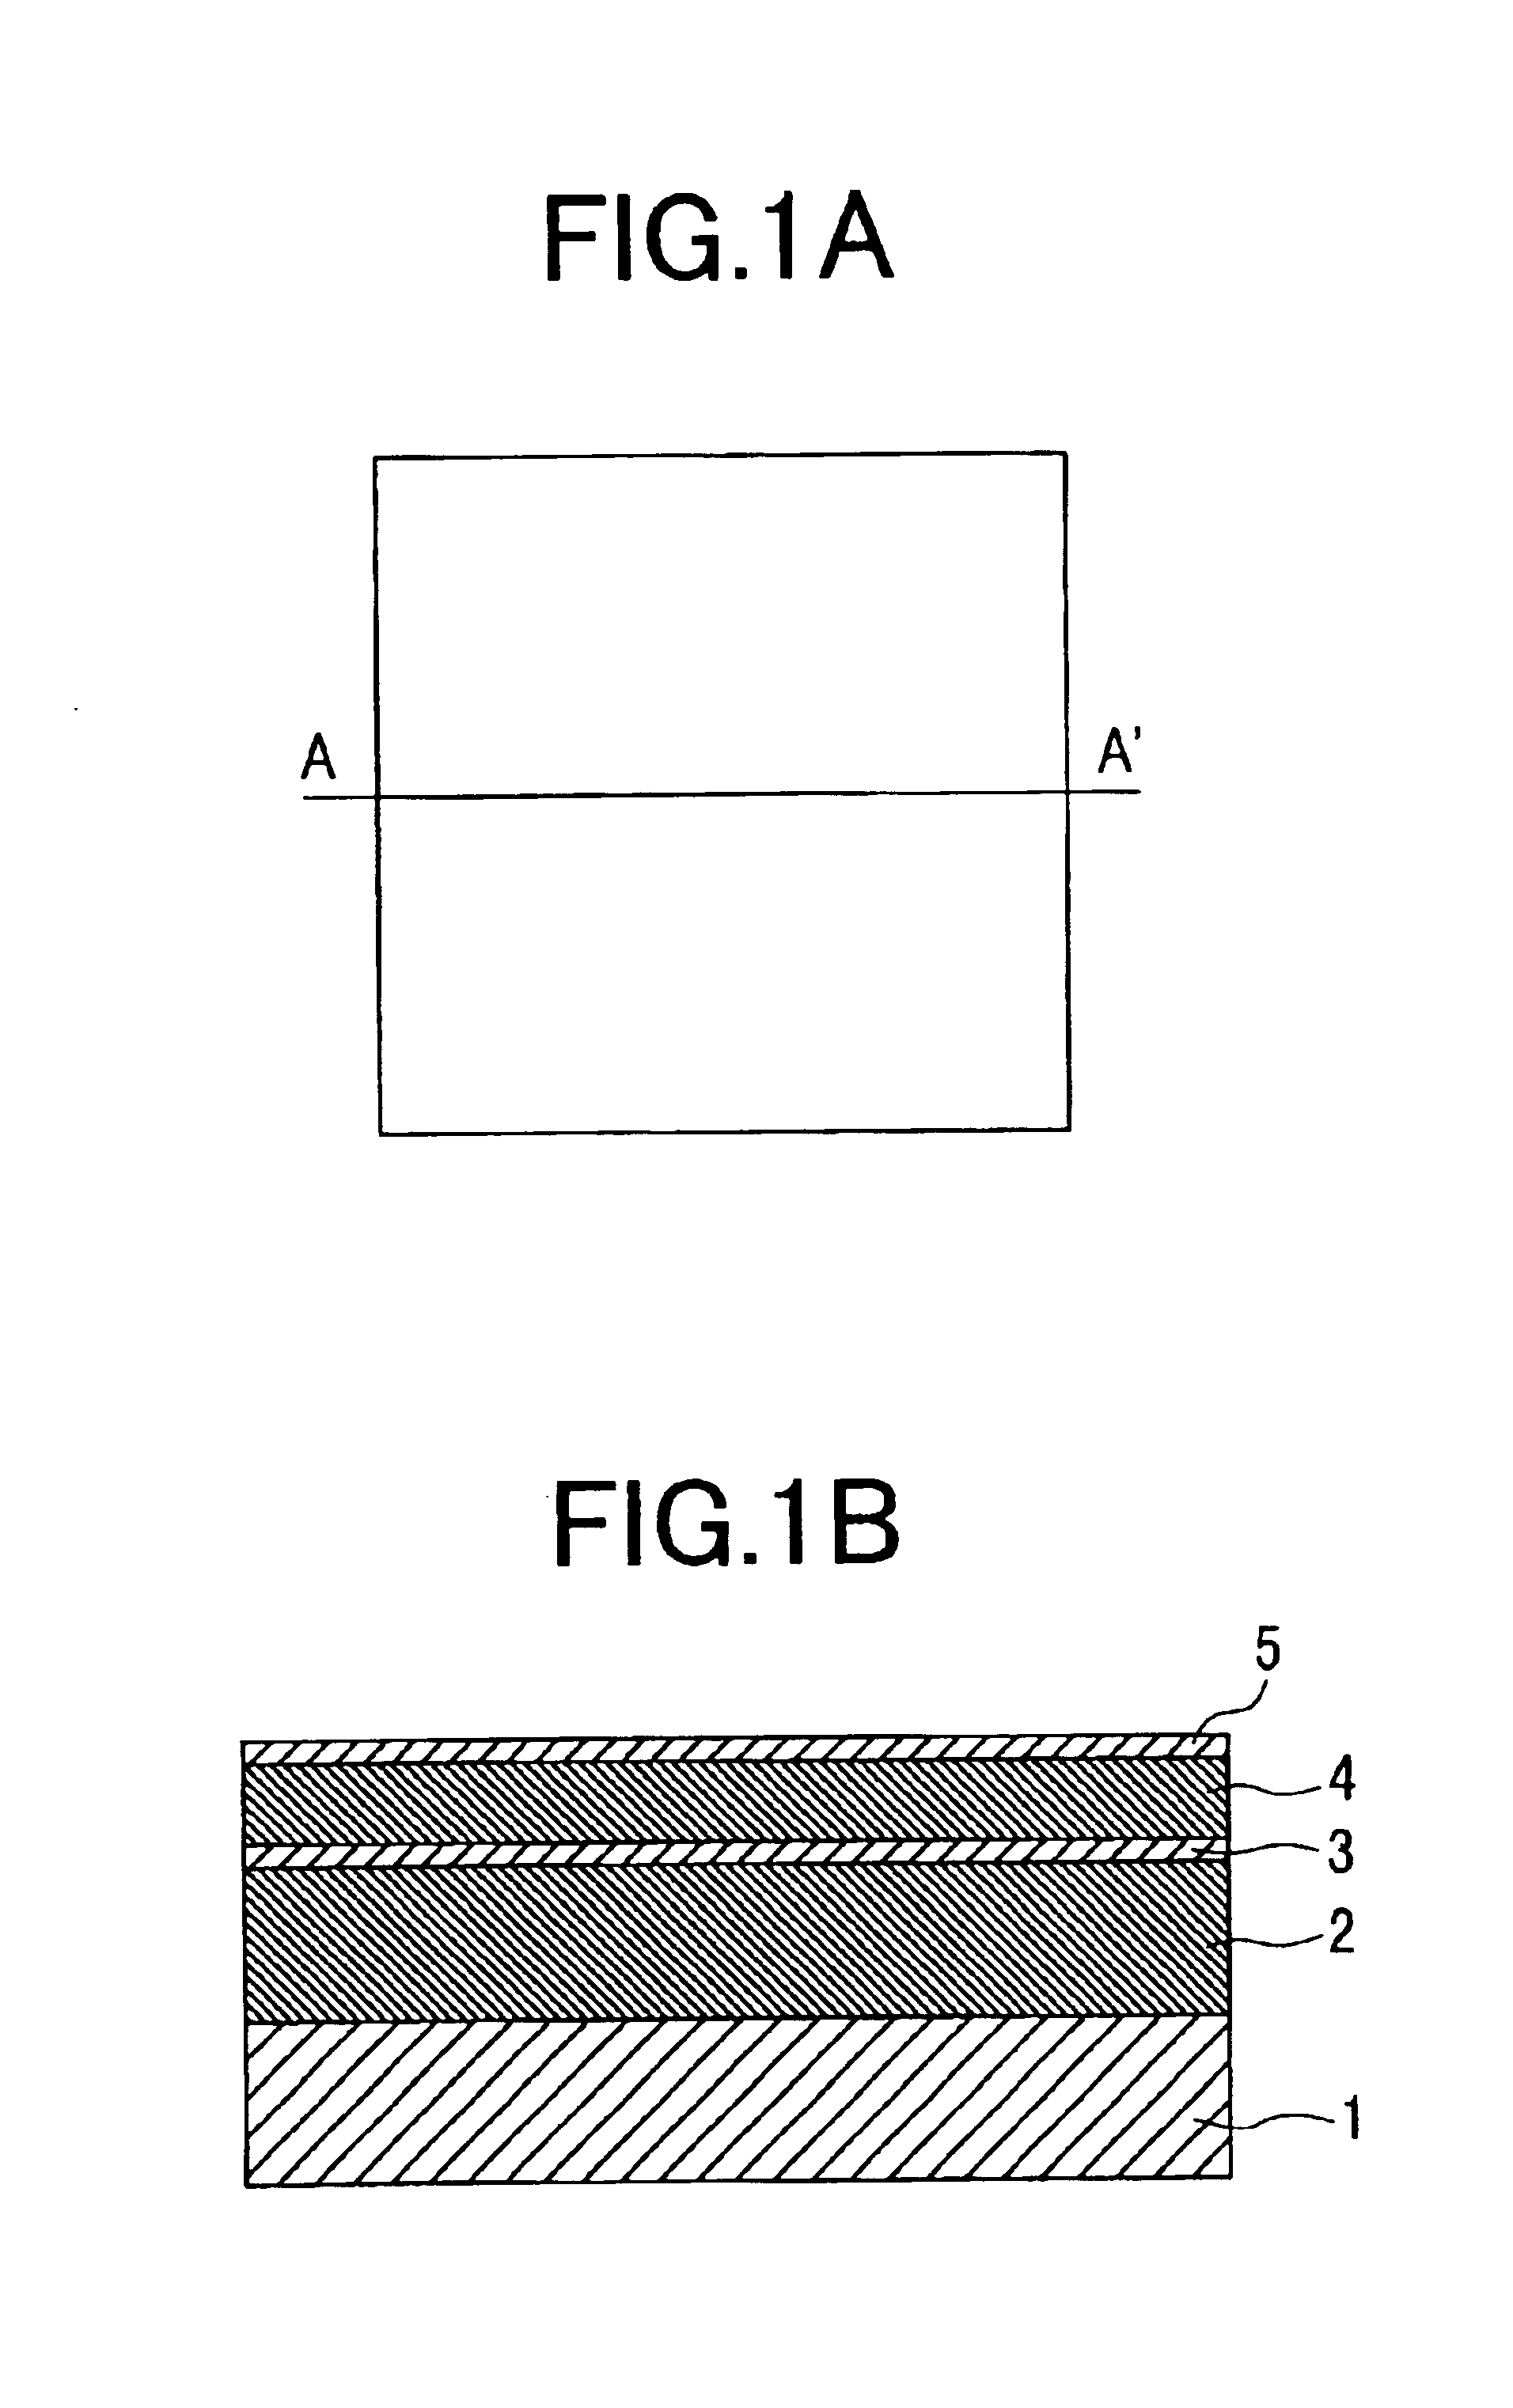 Insulated-gate field-effect transistor, method of fabricating same, and semiconductor device employing same